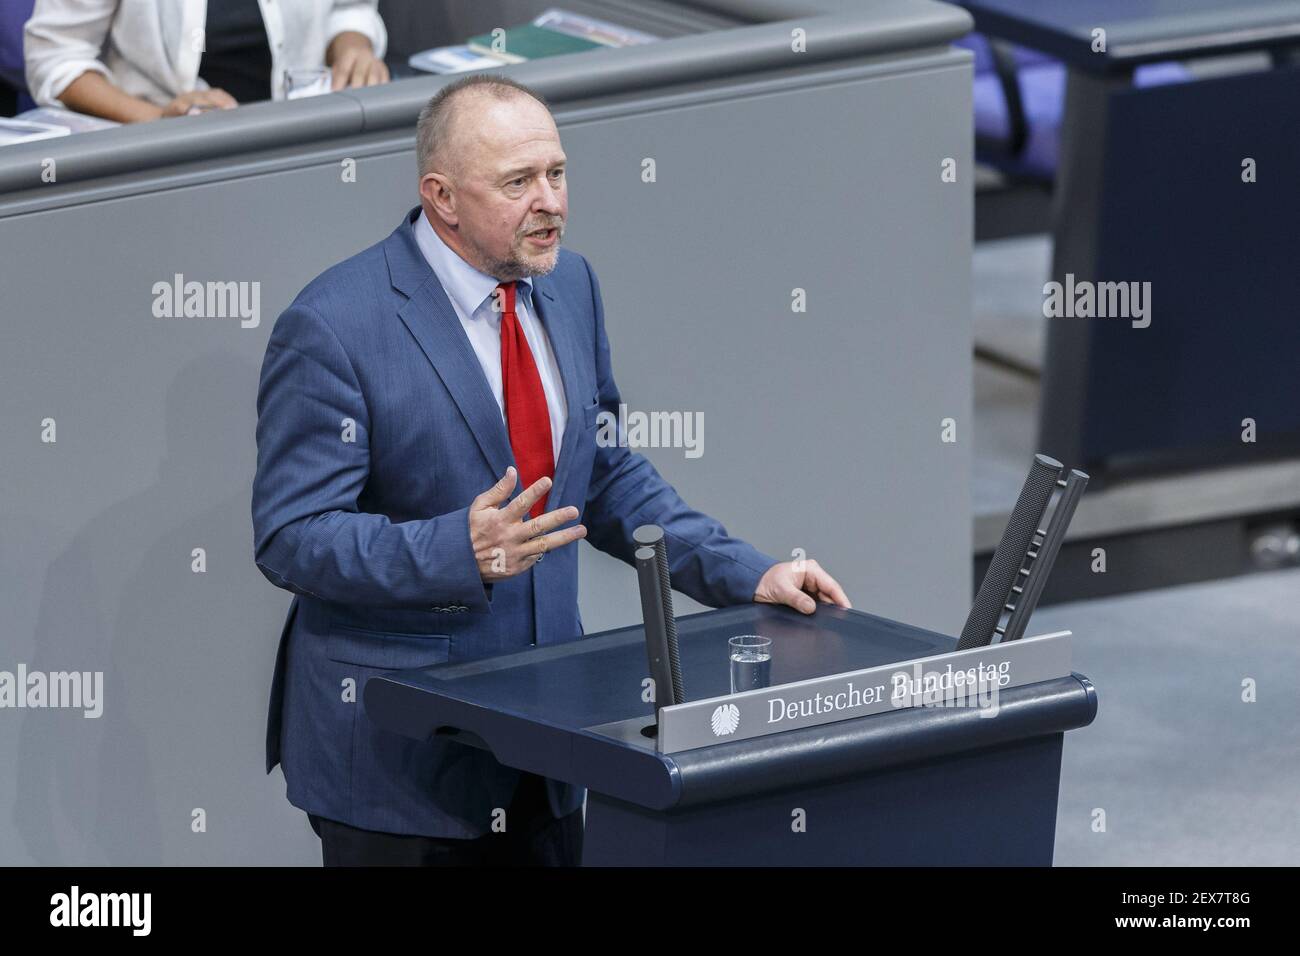 Special session of the German Parliament - consultation of government on the ' negotiations of the Government Federal relative to the concession of financial support for the Hellenic Republic of Greece ' realized at the German Parliament on 17.07.2015 in Berlin, Germany. / Picture: Axel SchÃ¤fer, during his speech at the session of the german Parliament relative to the concession of financial support for the Hellenic Republic of Greece. *** Please Use Credit from Credit Field *** Stock Photo